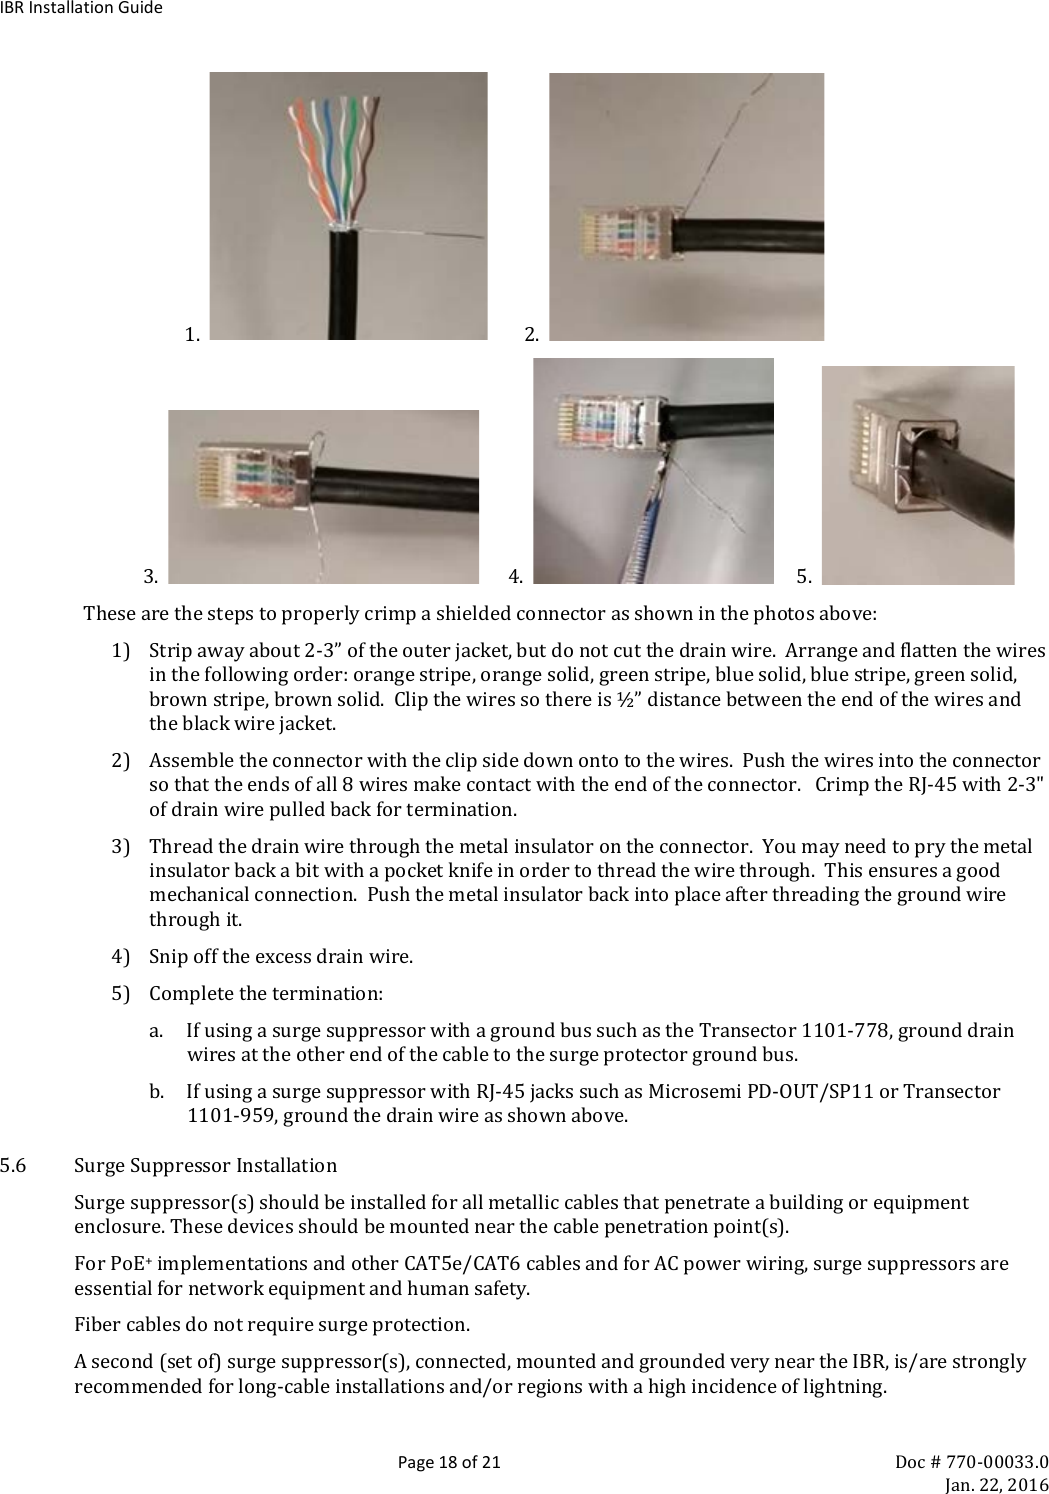 IBR Installation Guide  Page 18 of 21 Doc # 770-00033.0     Jan. 22, 2016                         1.           2.                      3.         4.        5.      These are the steps to properly crimp a shielded connector as shown in the photos above: 1) Strip away about 2-3” of the outer jacket, but do not cut the drain wire.  Arrange and flatten the wires in the following order: orange stripe, orange solid, green stripe, blue solid, blue stripe, green solid, brown stripe, brown solid.  Clip the wires so there is ½” distance between the end of the wires and the black wire jacket.  2) Assemble the connector with the clip side down onto to the wires.  Push the wires into the connector so that the ends of all 8 wires make contact with the end of the connector.   Crimp the RJ-45 with 2-3&quot; of drain wire pulled back for termination. 3) Thread the drain wire through the metal insulator on the connector.  You may need to pry the metal insulator back a bit with a pocket knife in order to thread the wire through.  This ensures a good mechanical connection.  Push the metal insulator back into place after threading the ground wire through it. 4) Snip off the excess drain wire. 5) Complete the termination: a. If using a surge suppressor with a ground bus such as the Transector 1101-778, ground drain wires at the other end of the cable to the surge protector ground bus. b. If using a surge suppressor with RJ-45 jacks such as Microsemi PD-OUT/SP11 or Transector 1101-959, ground the drain wire as shown above. 5.6 Surge Suppressor Installation Surge suppressor(s) should be installed for all metallic cables that penetrate a building or equipment enclosure. These devices should be mounted near the cable penetration point(s).   For PoE+ implementations and other CAT5e/CAT6 cables and for AC power wiring, surge suppressors are essential for network equipment and human safety.  Fiber cables do not require surge protection. A second (set of) surge suppressor(s), connected, mounted and grounded very near the IBR, is/are strongly recommended for long-cable installations and/or regions with a high incidence of lightning.  